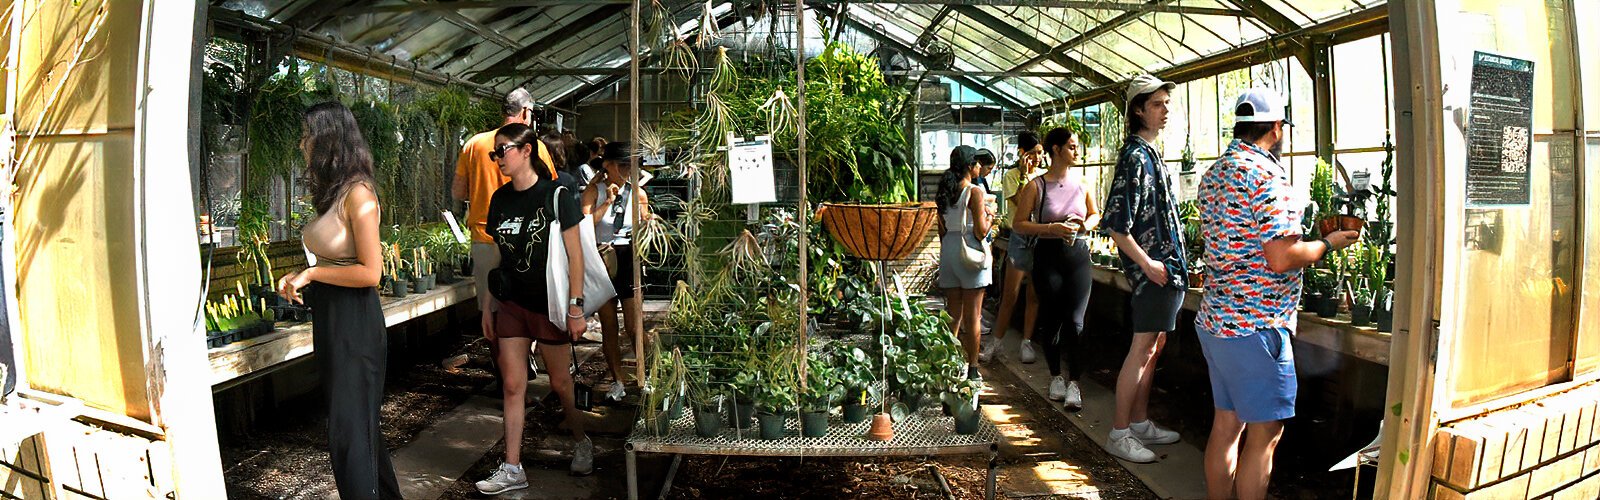 The Bull Bash plant market drew a crowd of plant lovers to the USF Botanical Gardens in Tampa on August 19th.